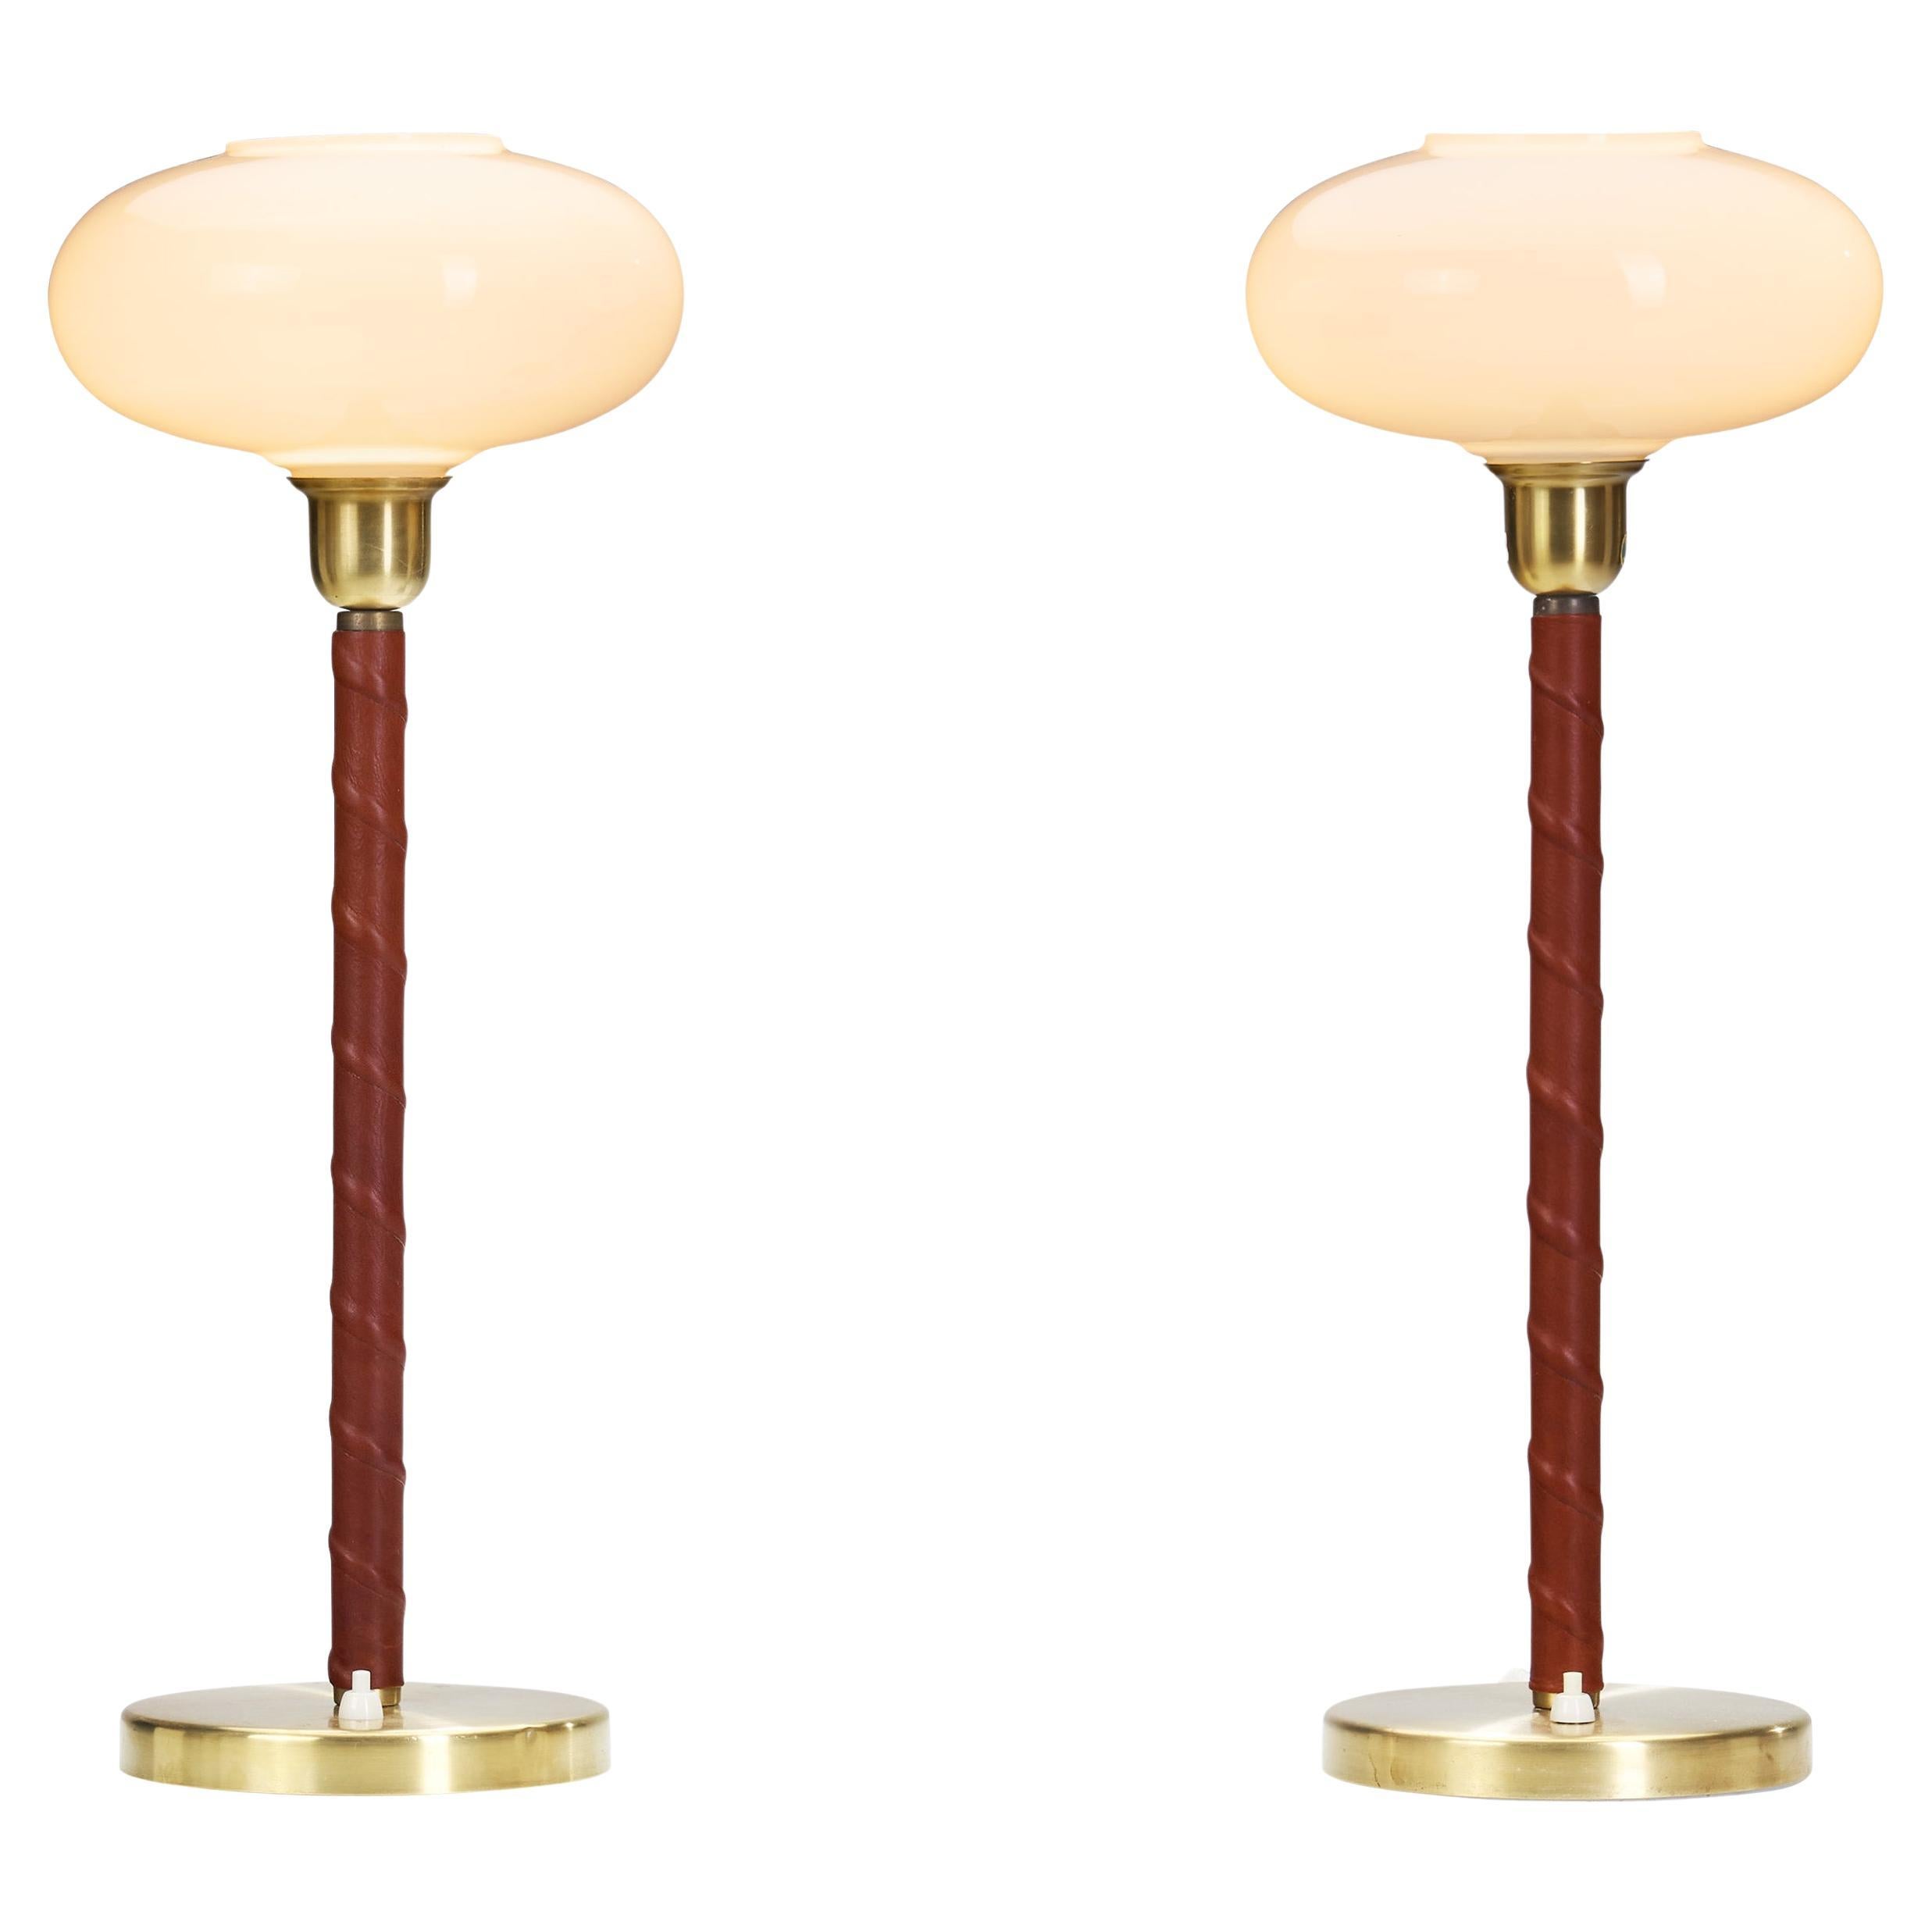 Pair of Brass and Leather "E1251" Table Lamps by ASEA, Sweden 20th Century For Sale